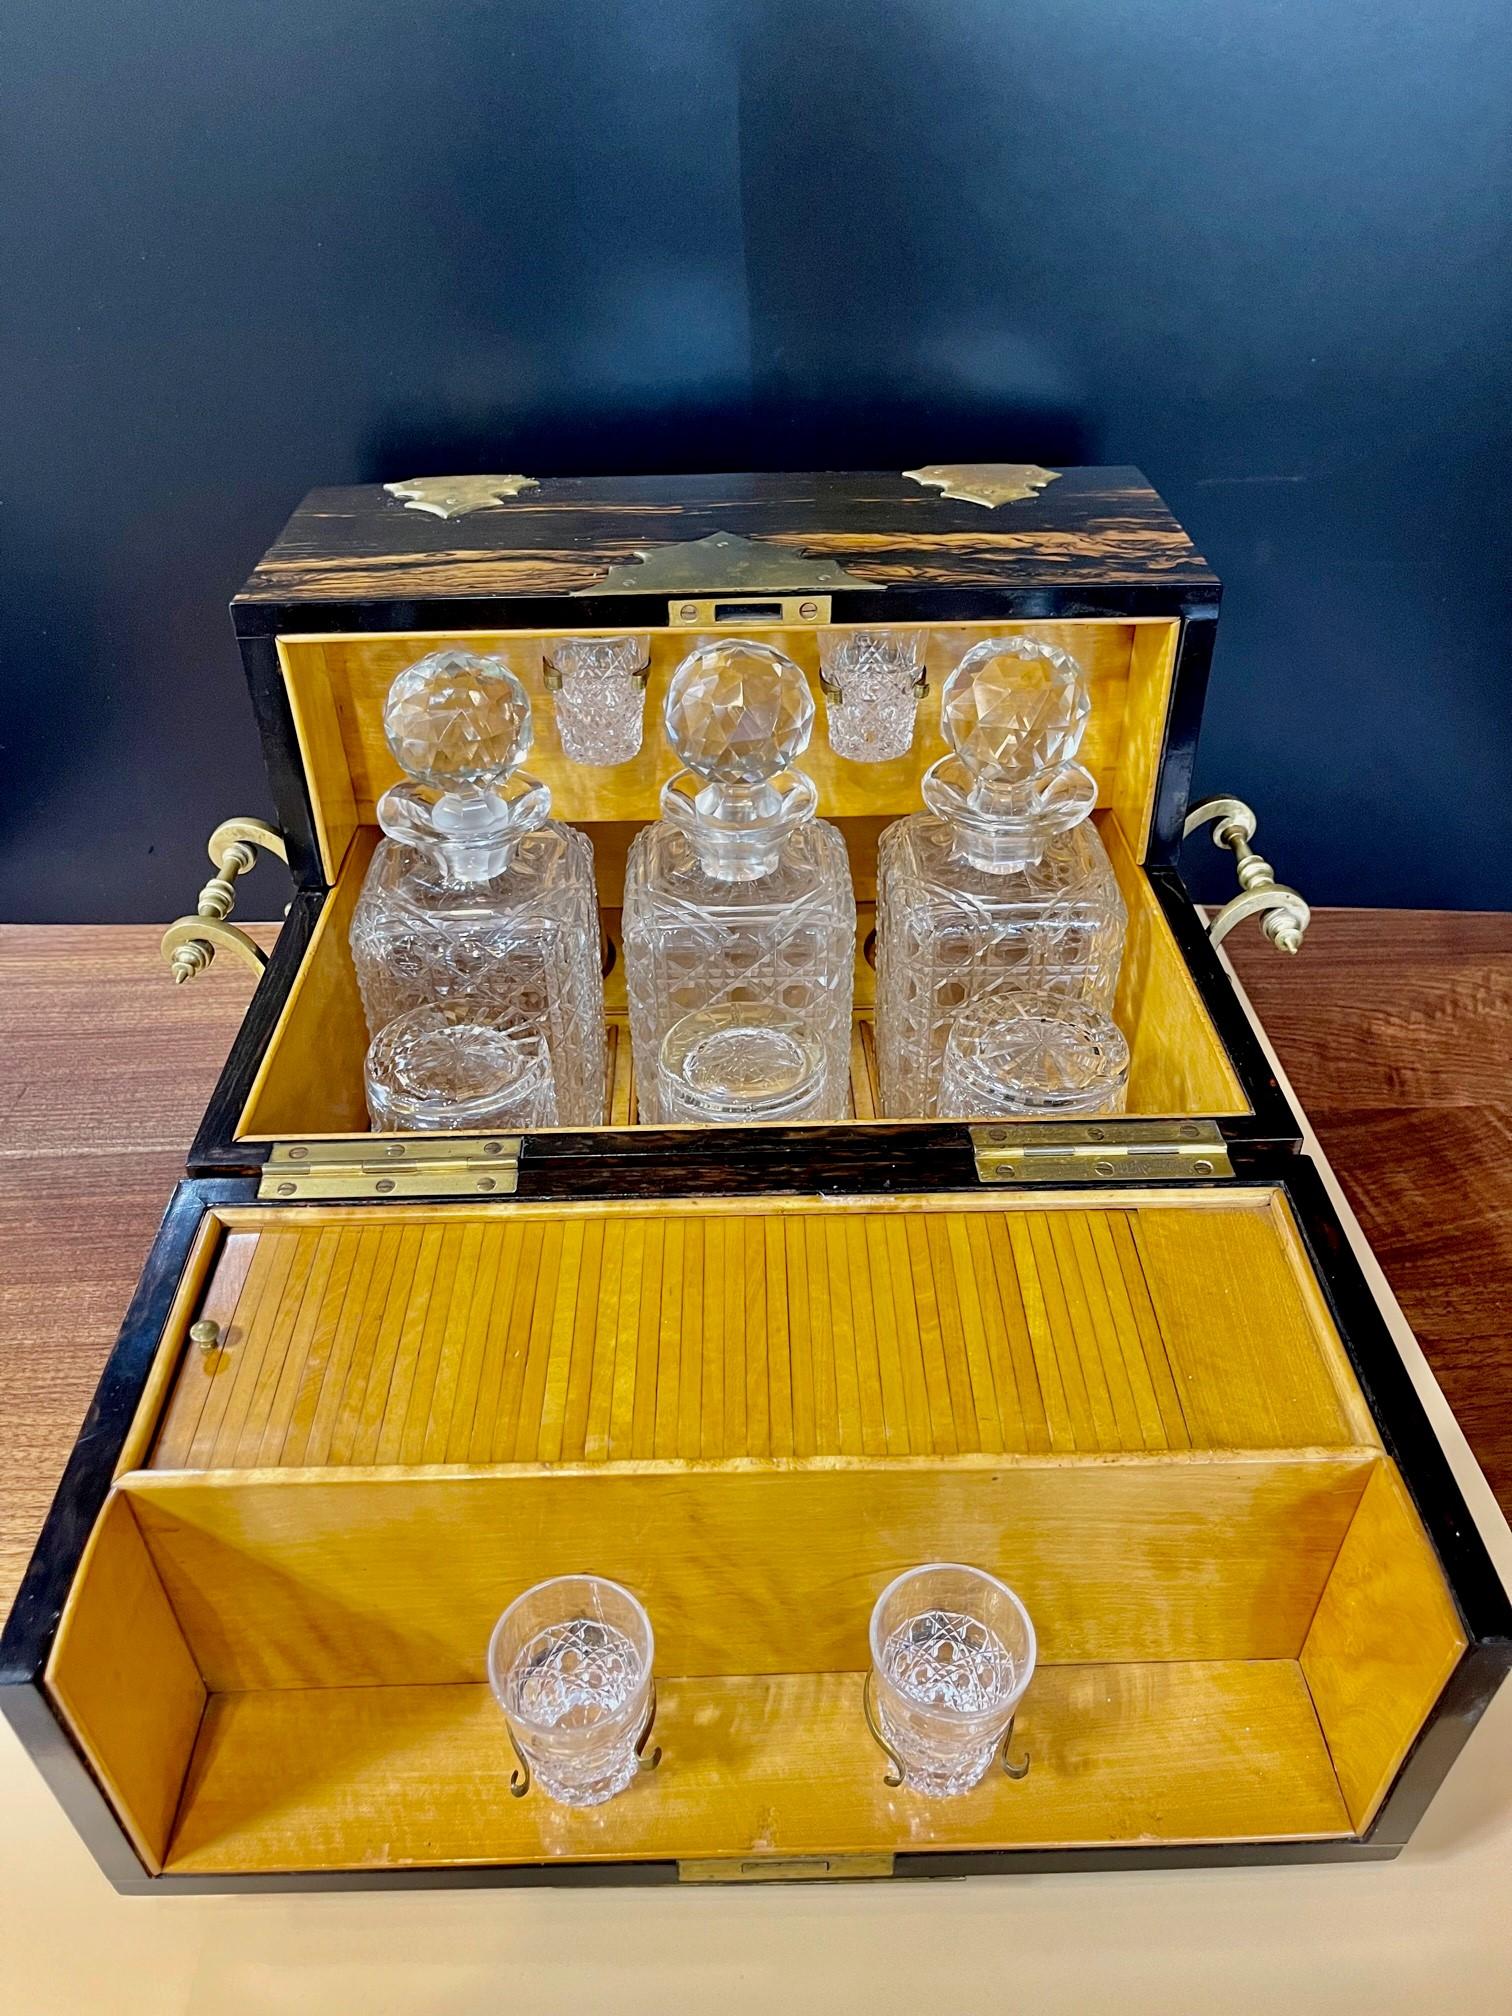 Late 19th century Mappin & Webb travel bar and Game box loaded with amazing pieces in a beautiful burl wood cabinet simply the best English 1890. This is from a private collector who traveled the world buying and selling beautiful pieces. Signed on